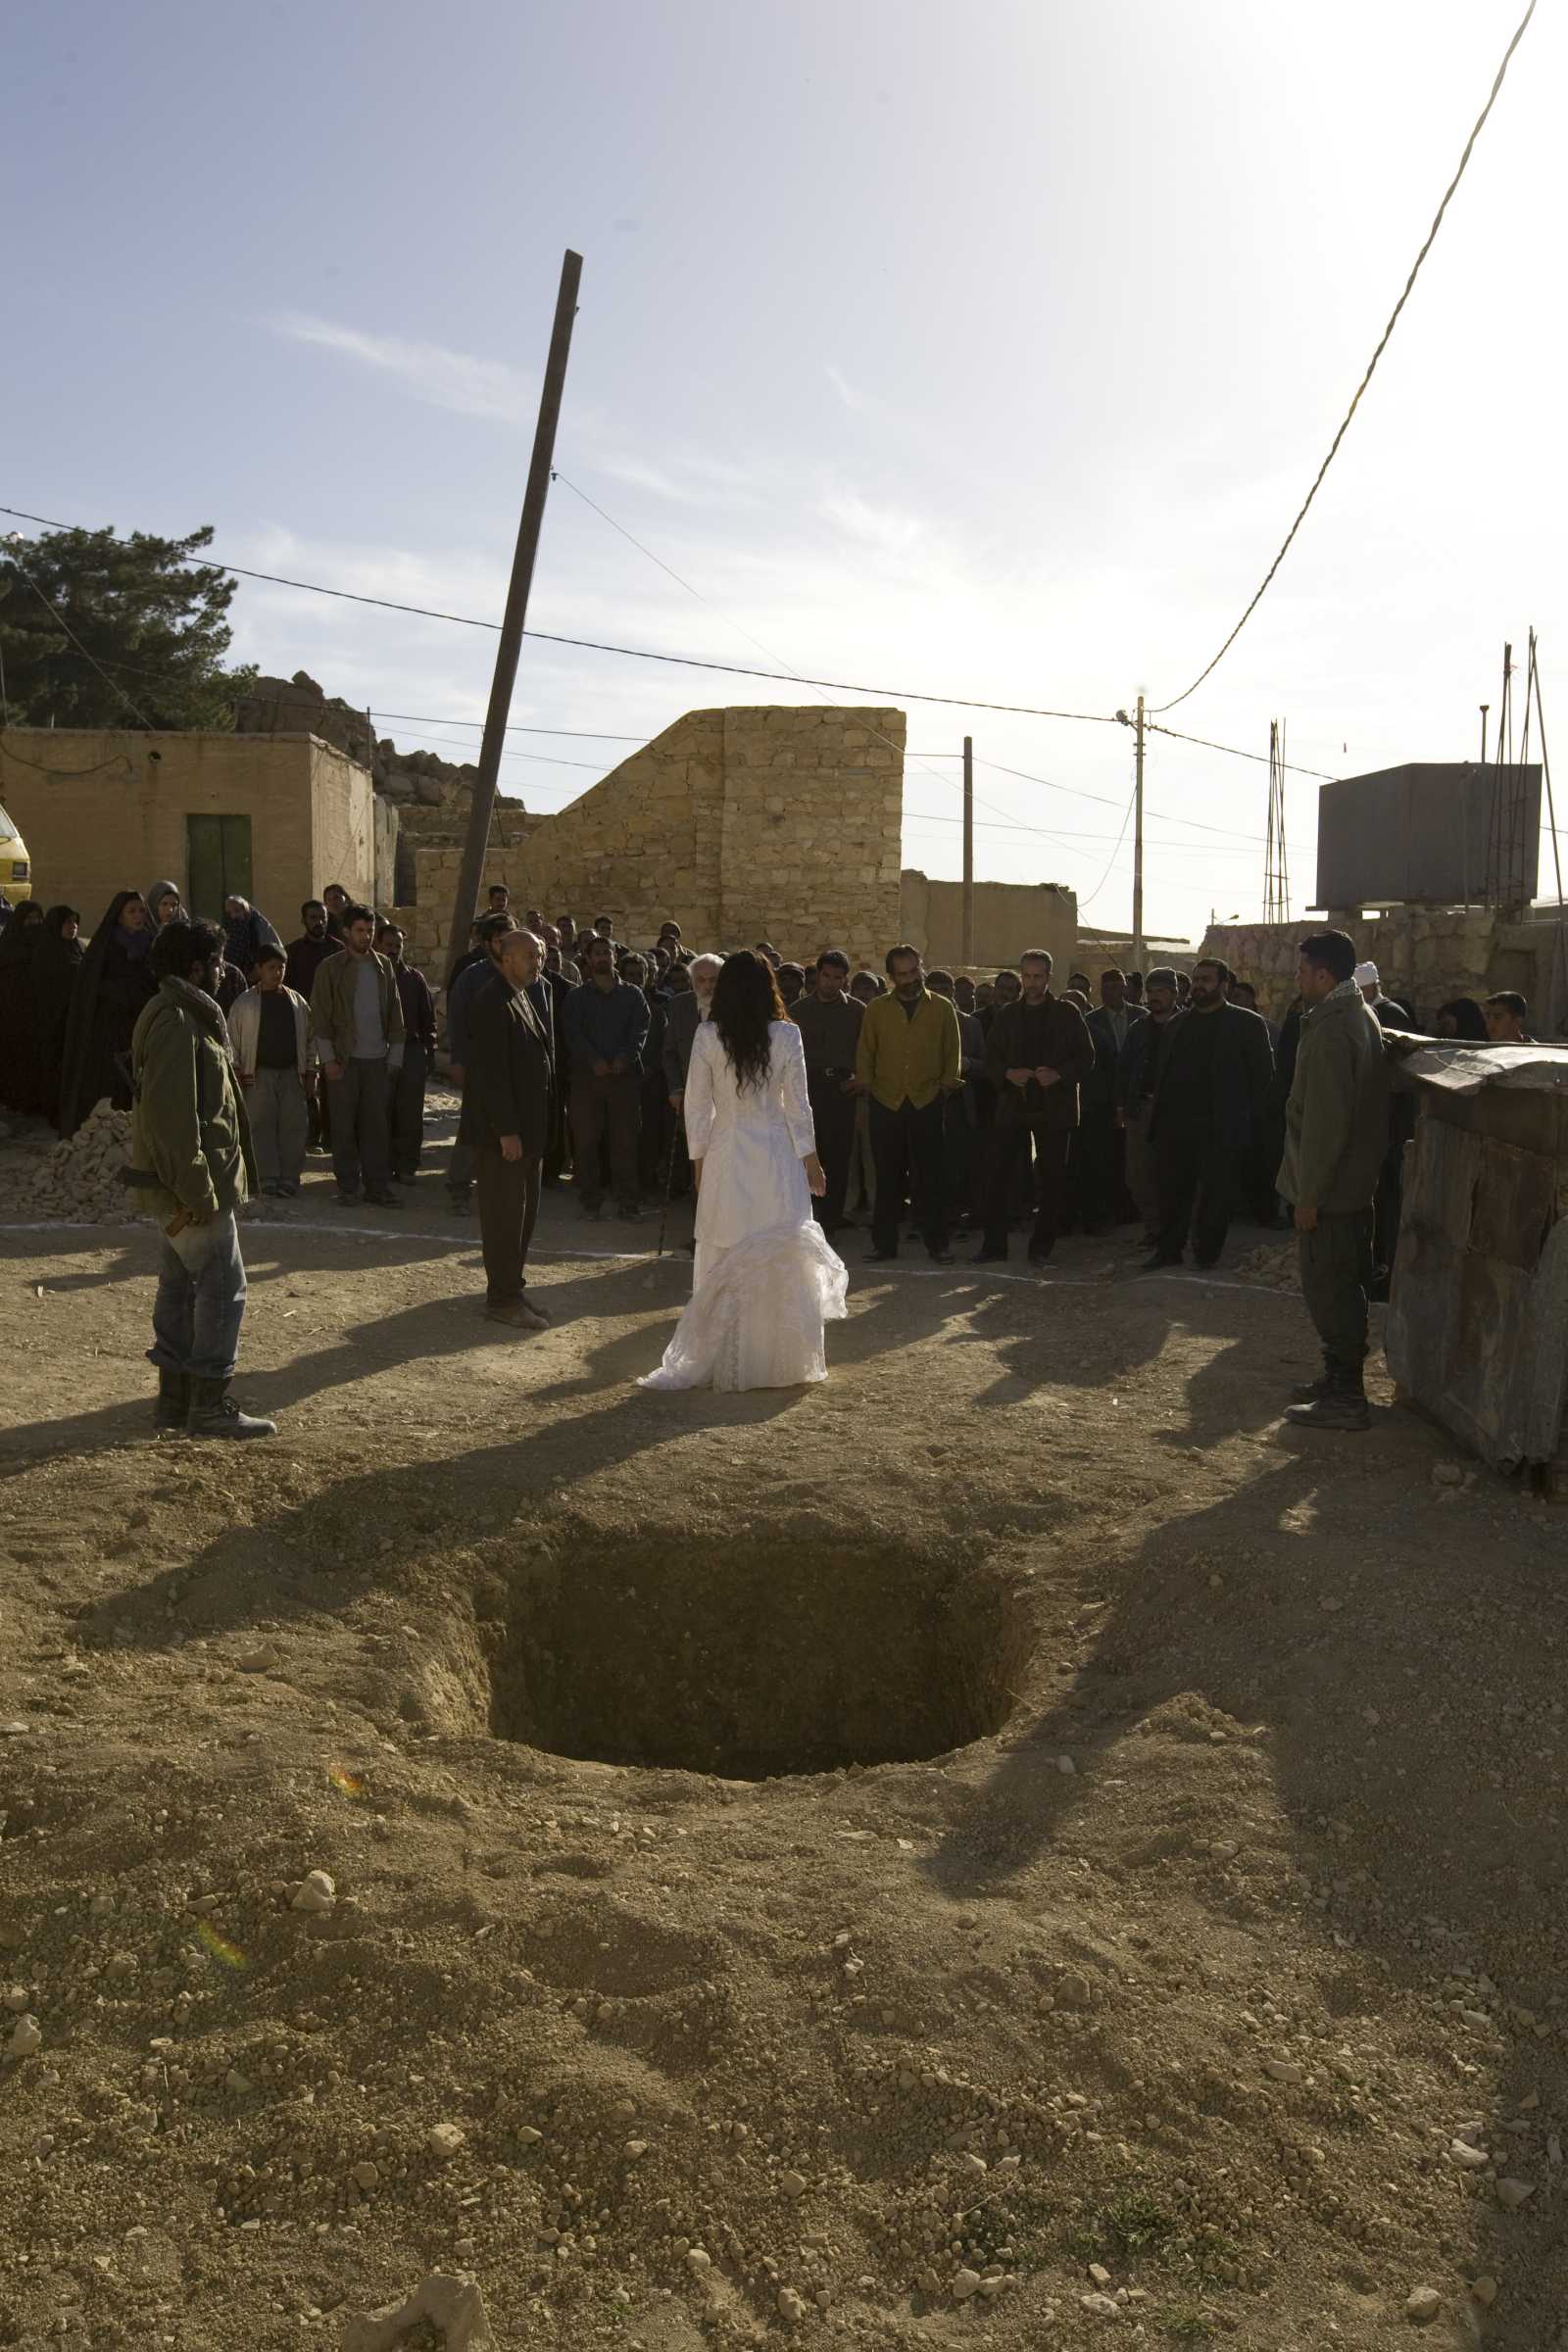 Soraya M. (Mozhan Marno), speaking her last words to the crowd in 'The Stoning of Soraya M.' (2009).